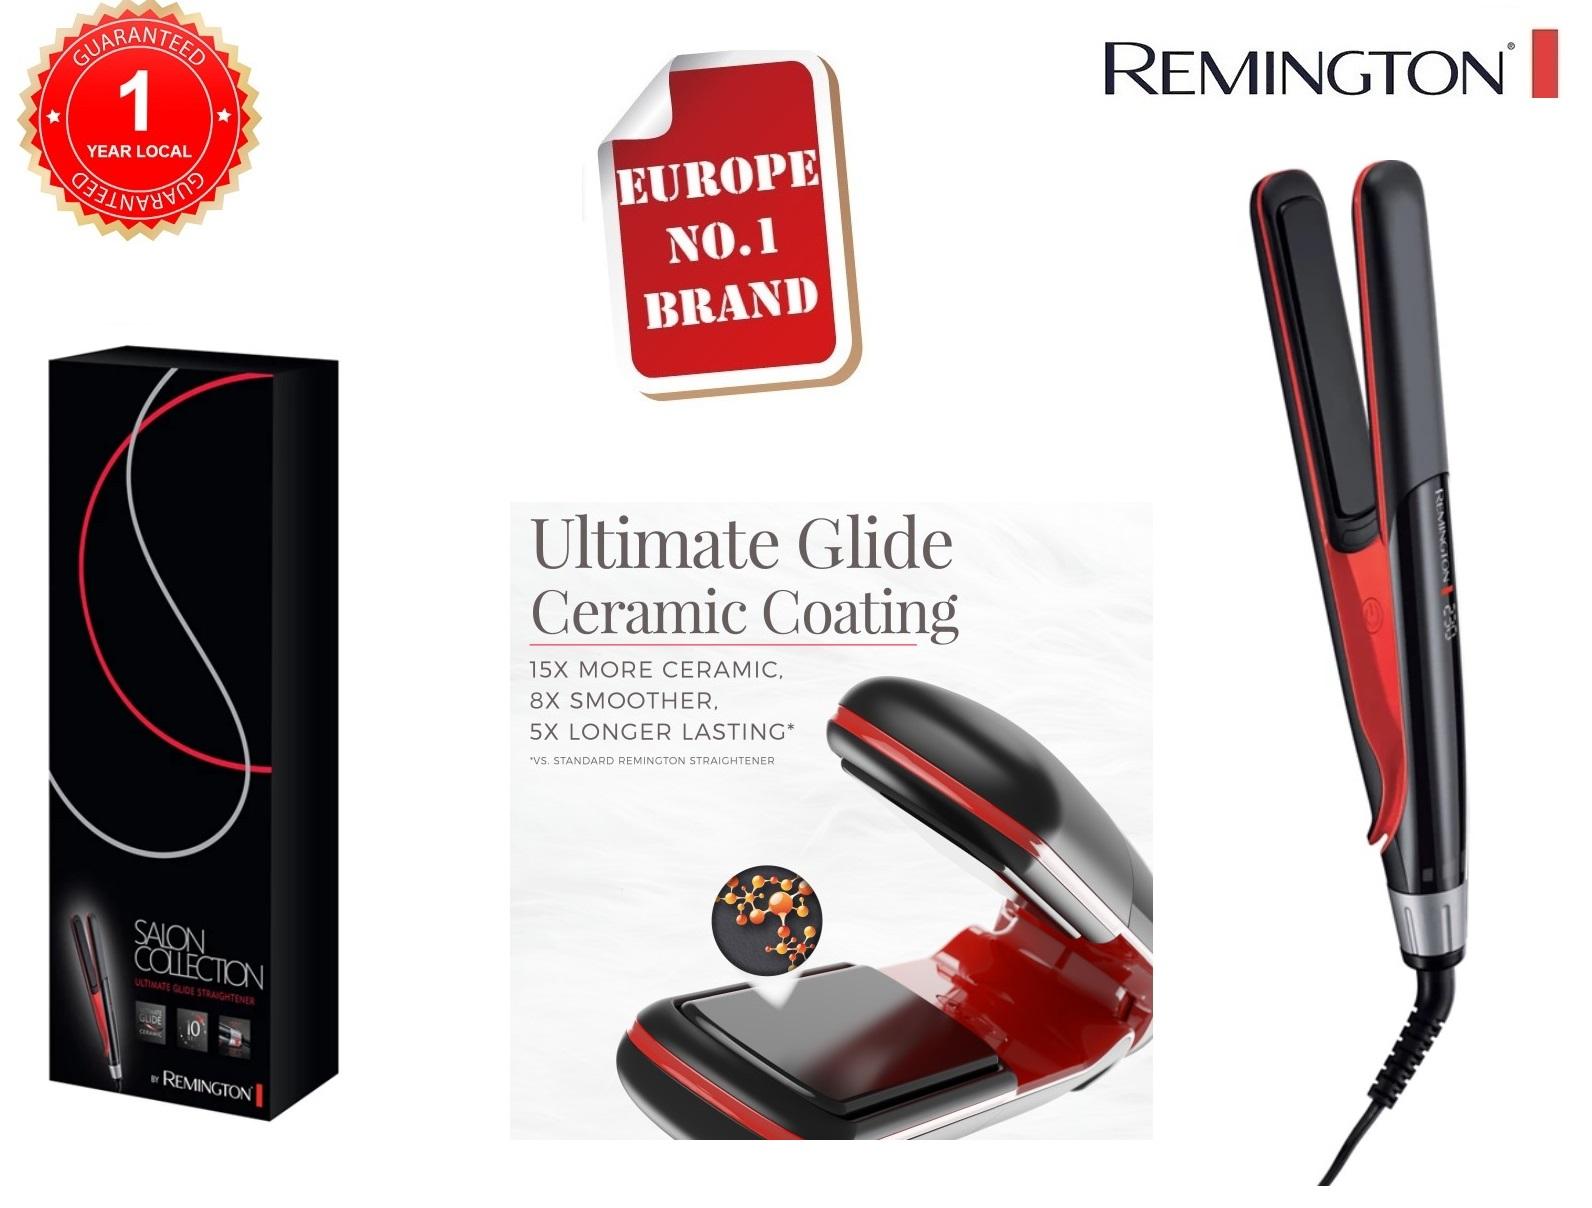 Remington - Black and red 'Salon Collection Ultimate Glide' hair  straightener S9700 [ 1 YR SG WARRANTY ] | Lazada Singapore